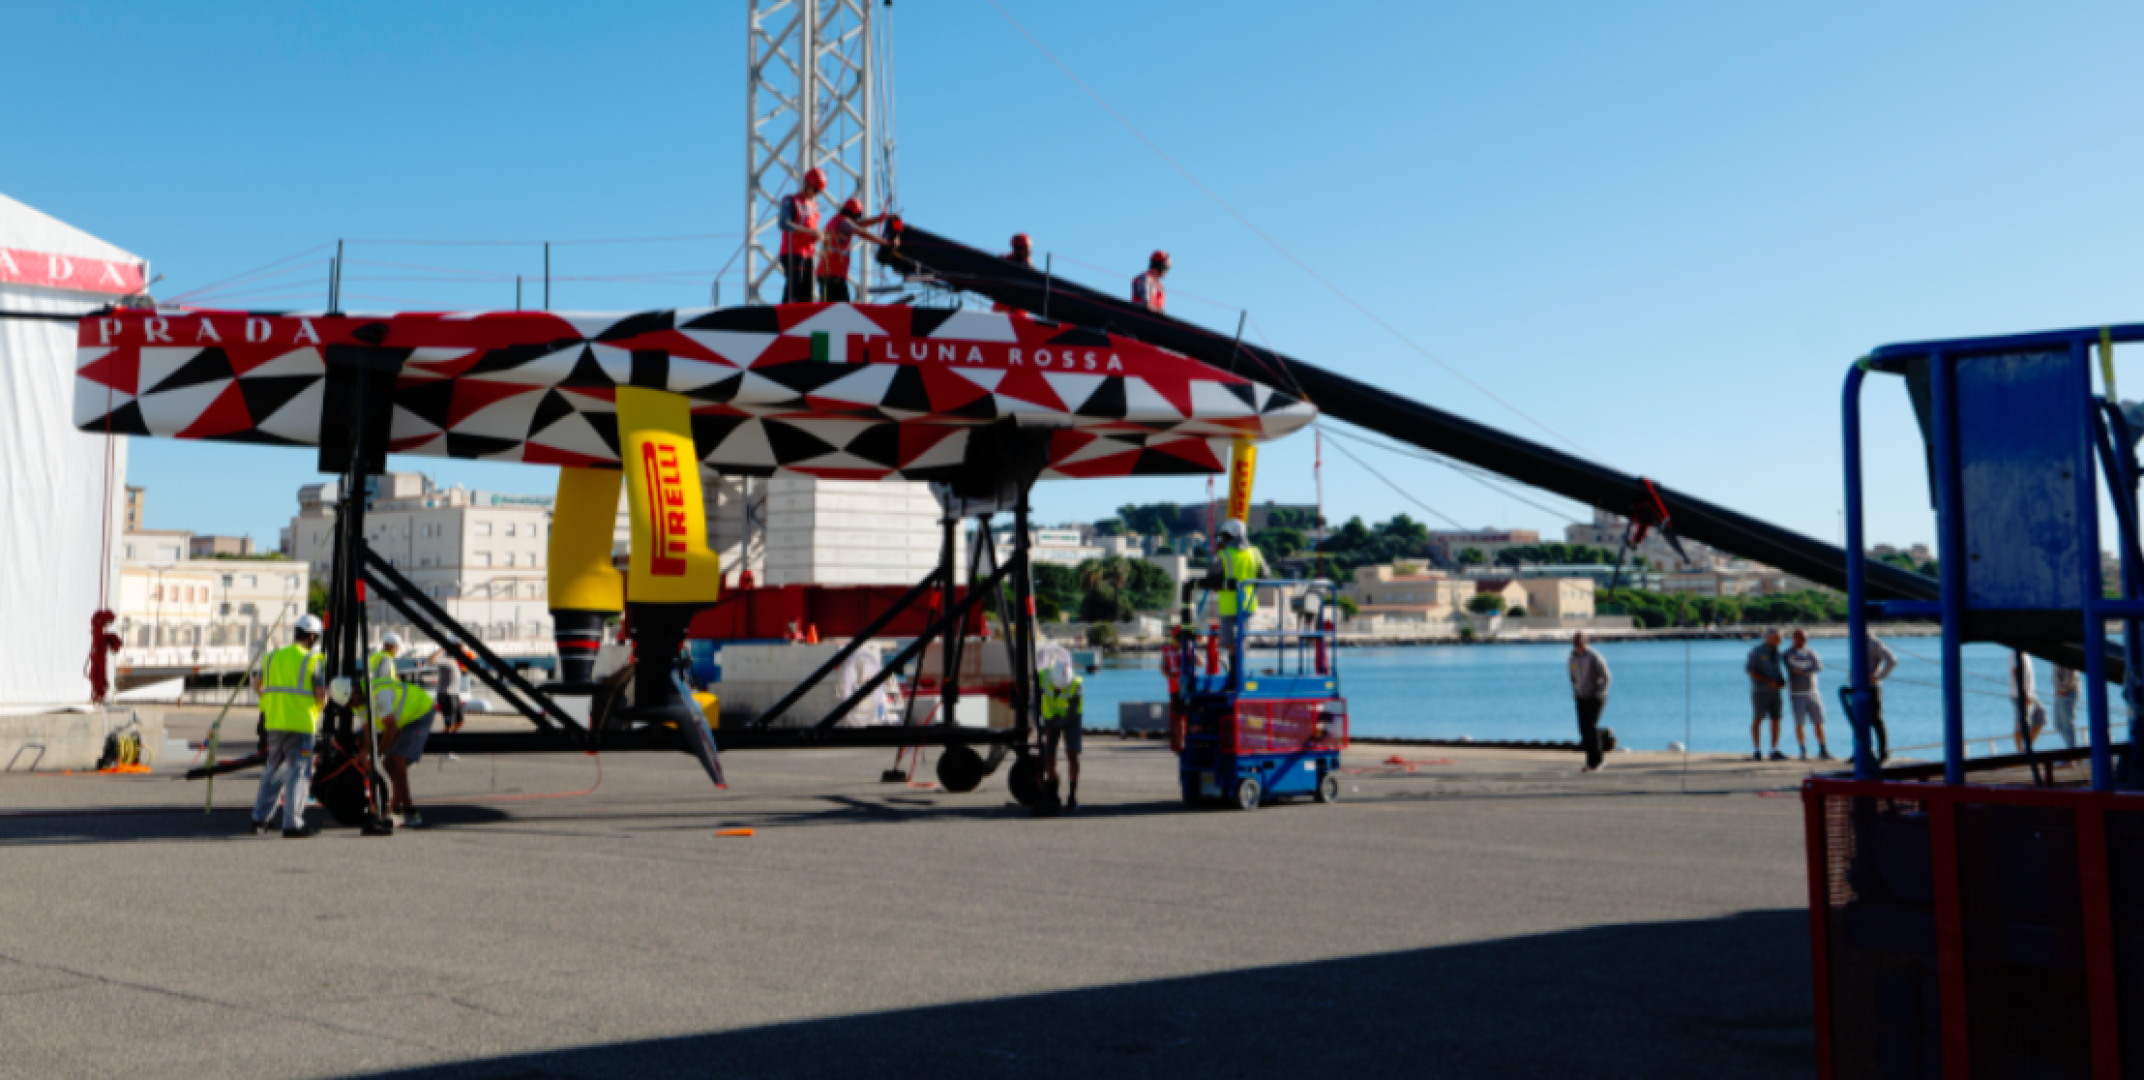 Luna Rossa: we can build and fix anything